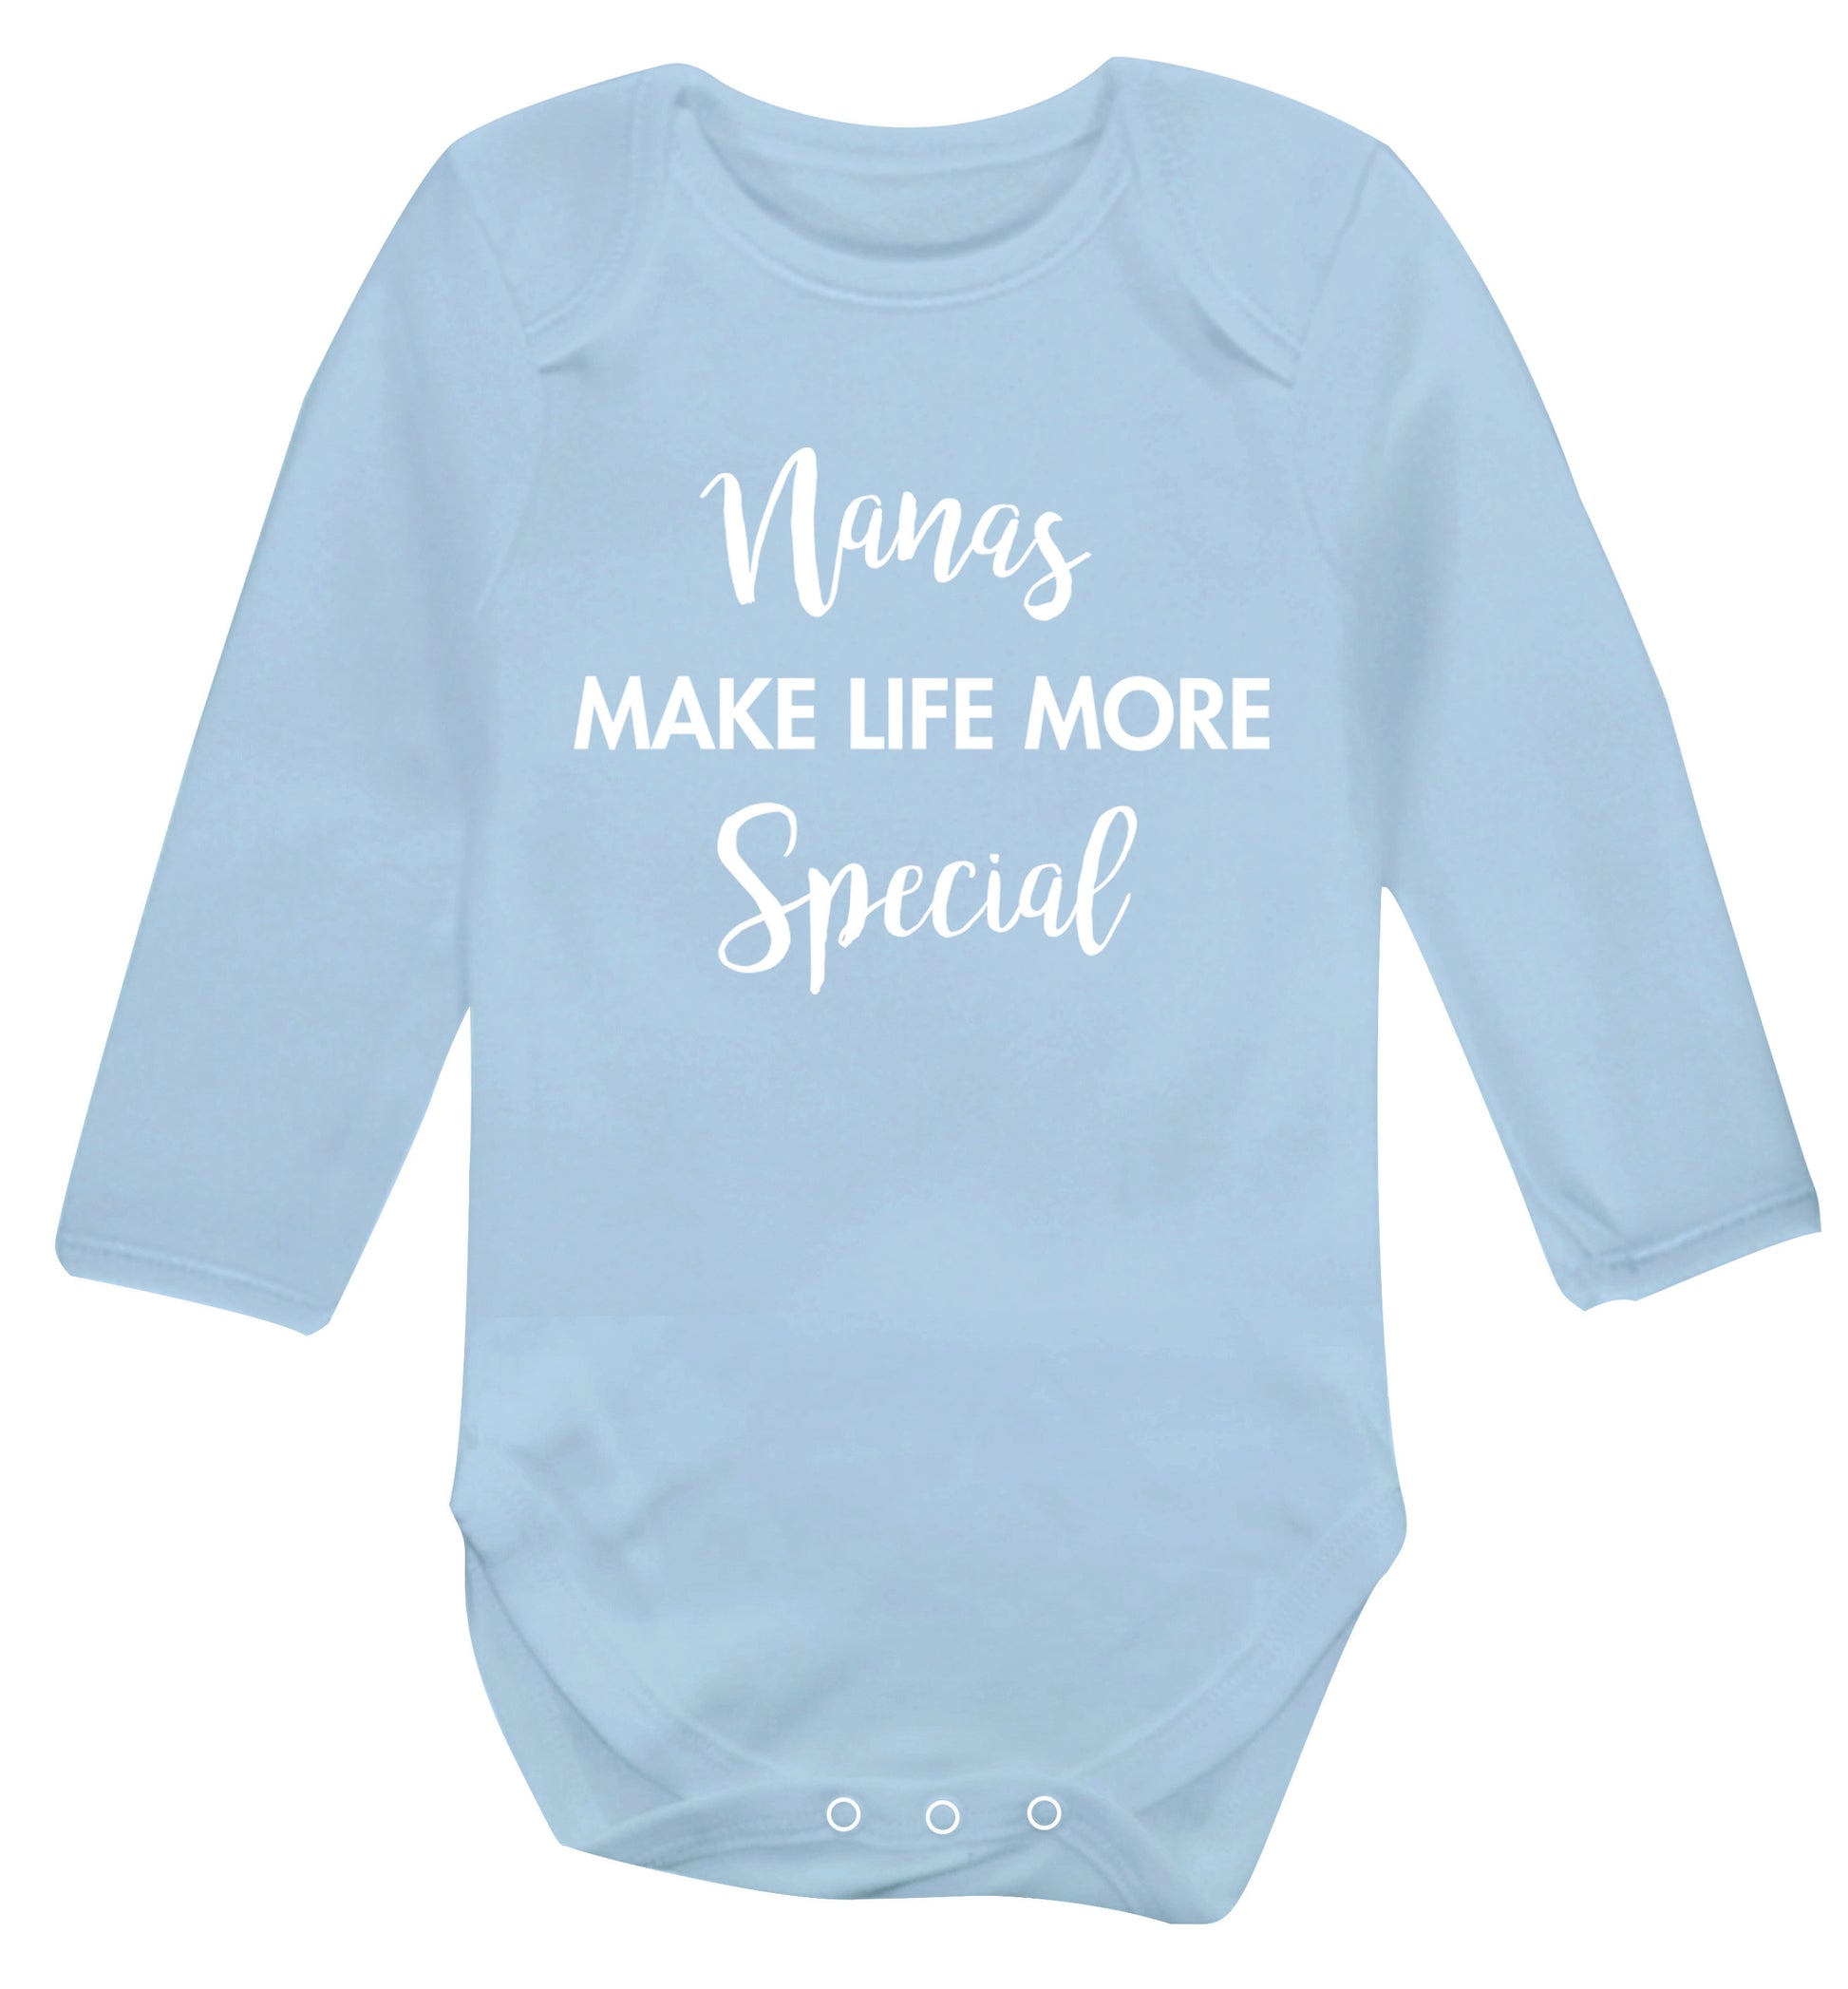 Nanas make life more special Baby Vest long sleeved pale blue 6-12 months